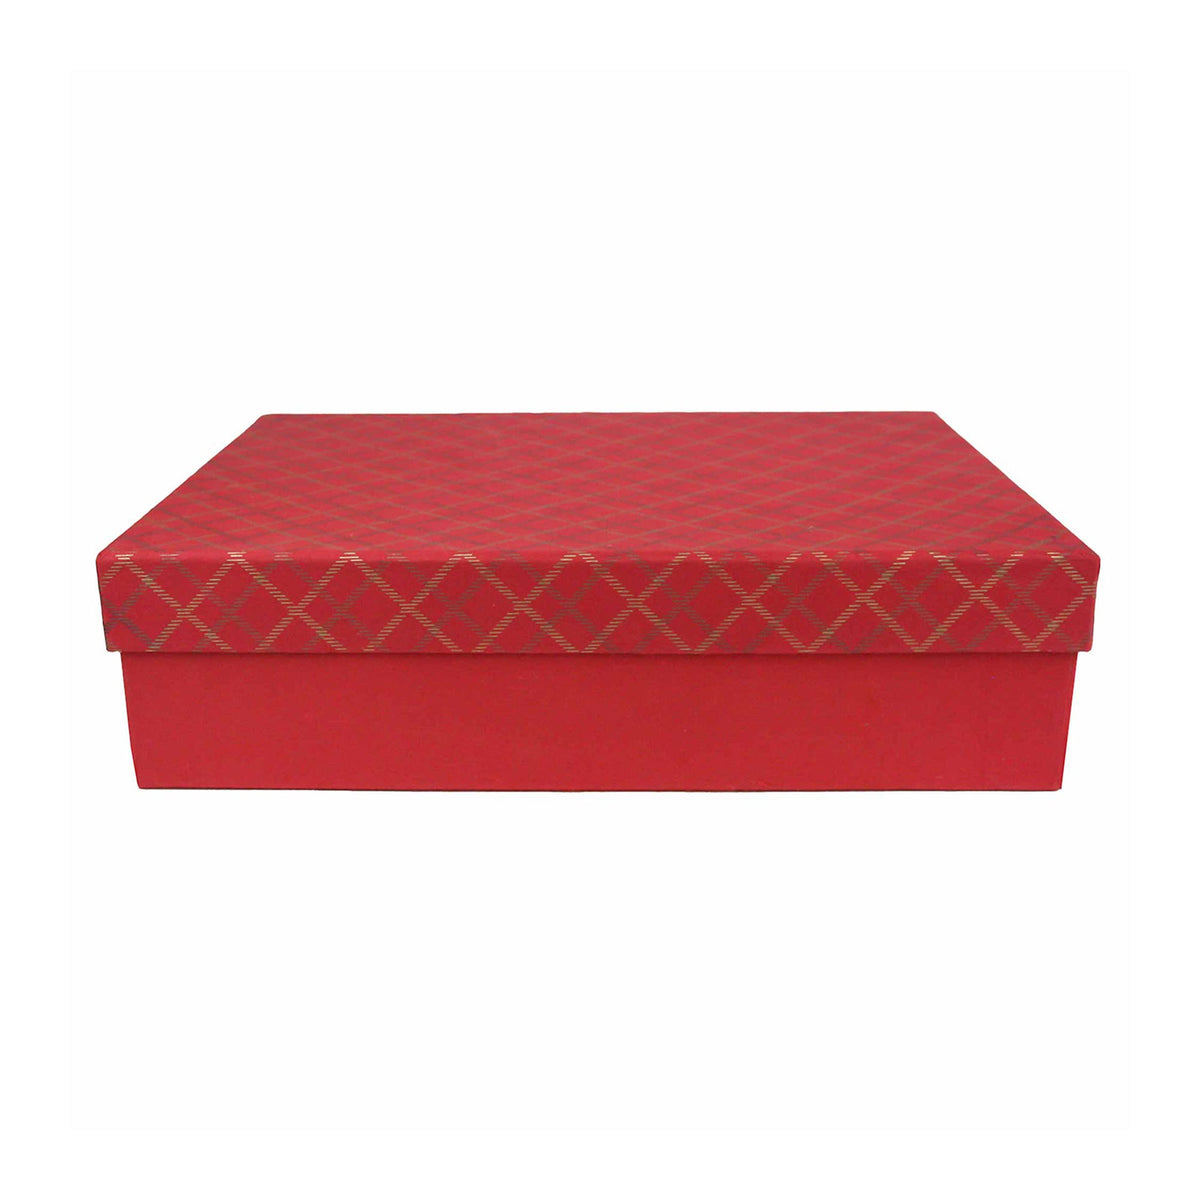 Handcrafted Chequered Red Gift Box - Single (Sizes Available)